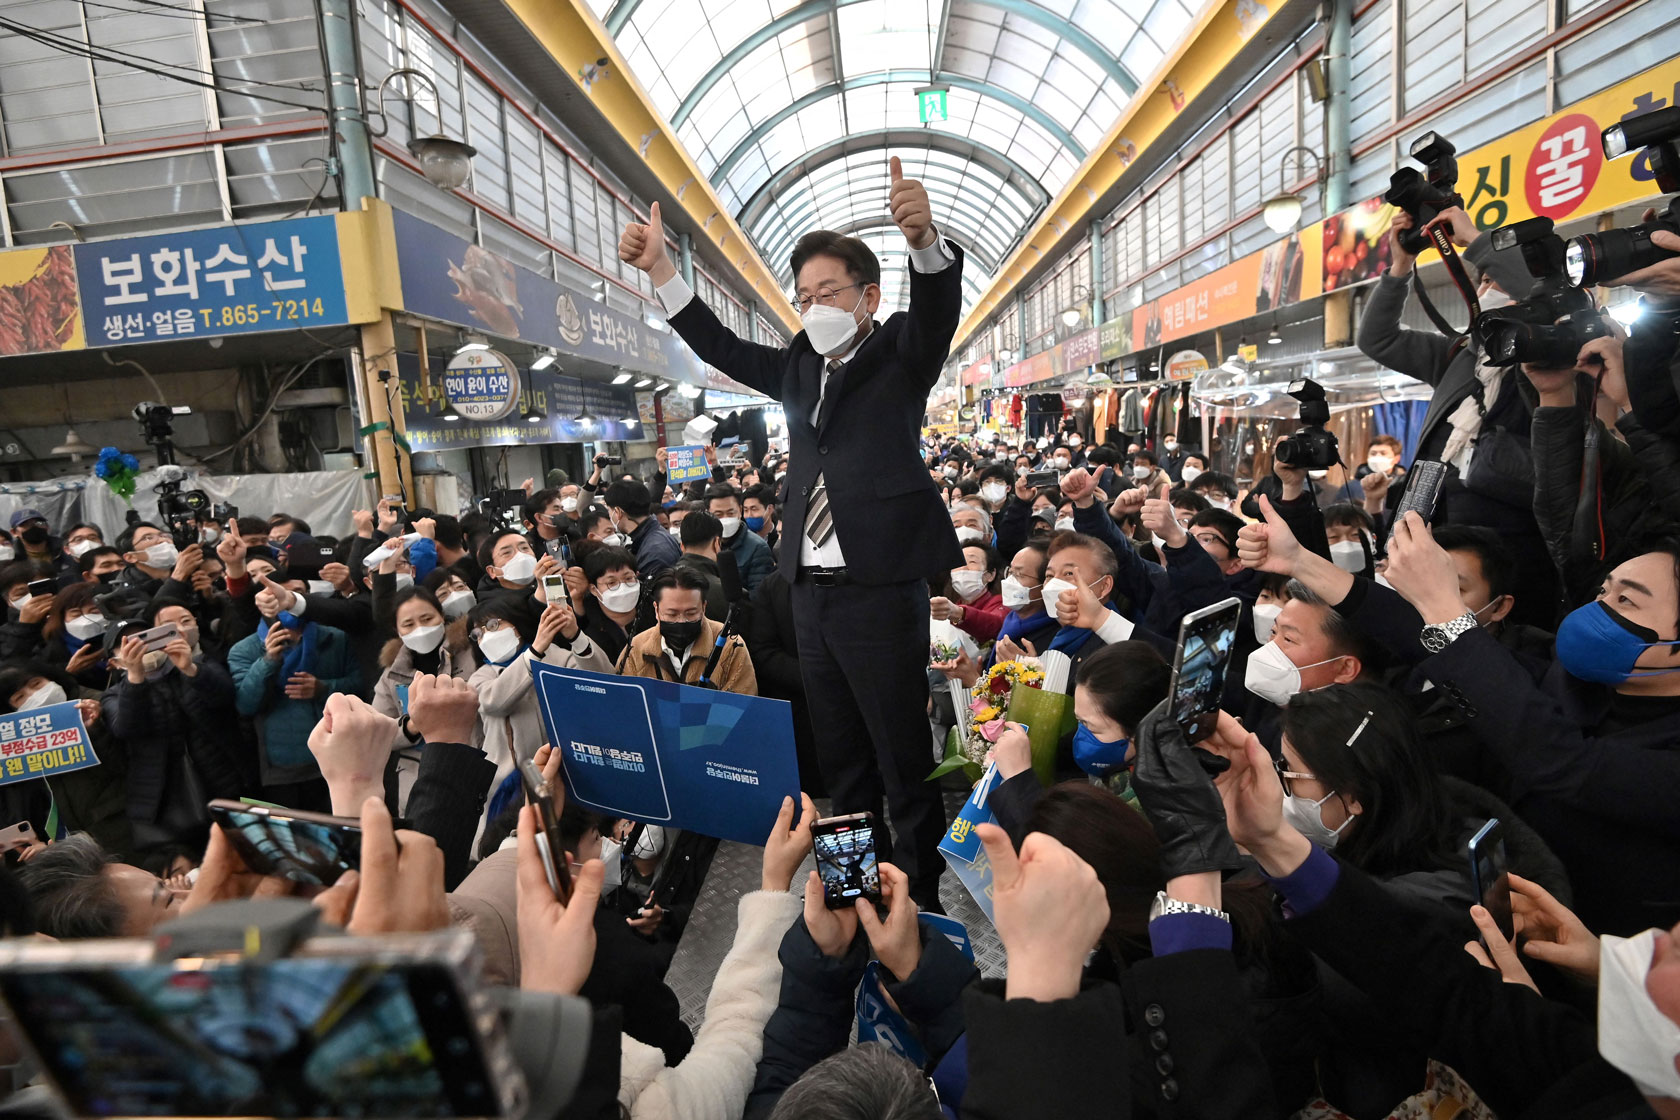 This picture taken on February 12, 2022 shows South Korean presidential candidate Lee Jae-myung (C) of the ruling Democratic Party waving to supporters during an election campaign at a market in Sejong ahead of the March 9 presidential election. - Lee, a school dropout maimed in an industrial accident as a teen, is the ruling Democratic Party's maverick candidate in the March 9 election.